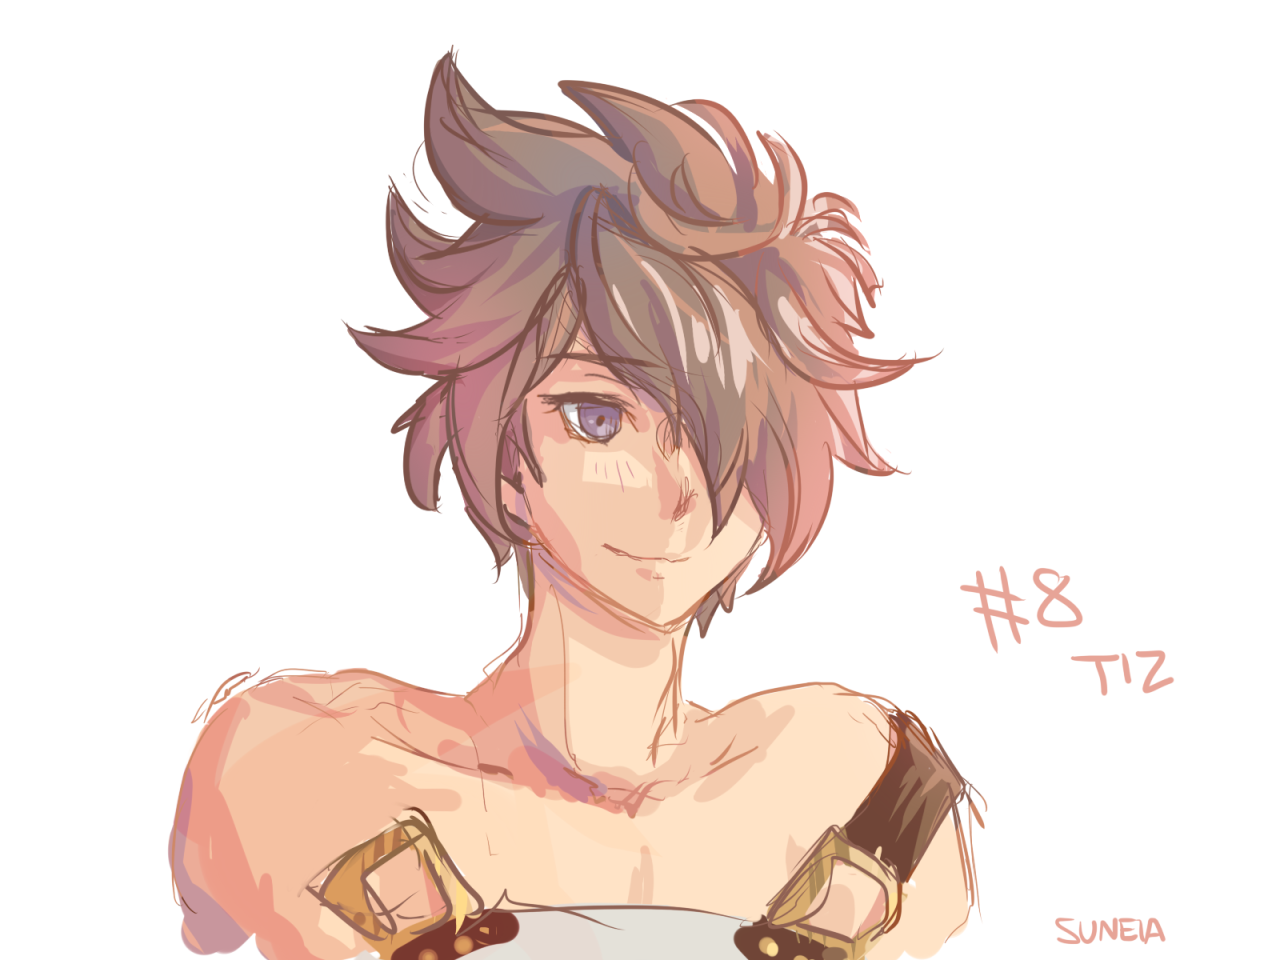 headphonesuneia:  #8 is Tiz Arrior again! Finally, I managed to draw him with adult